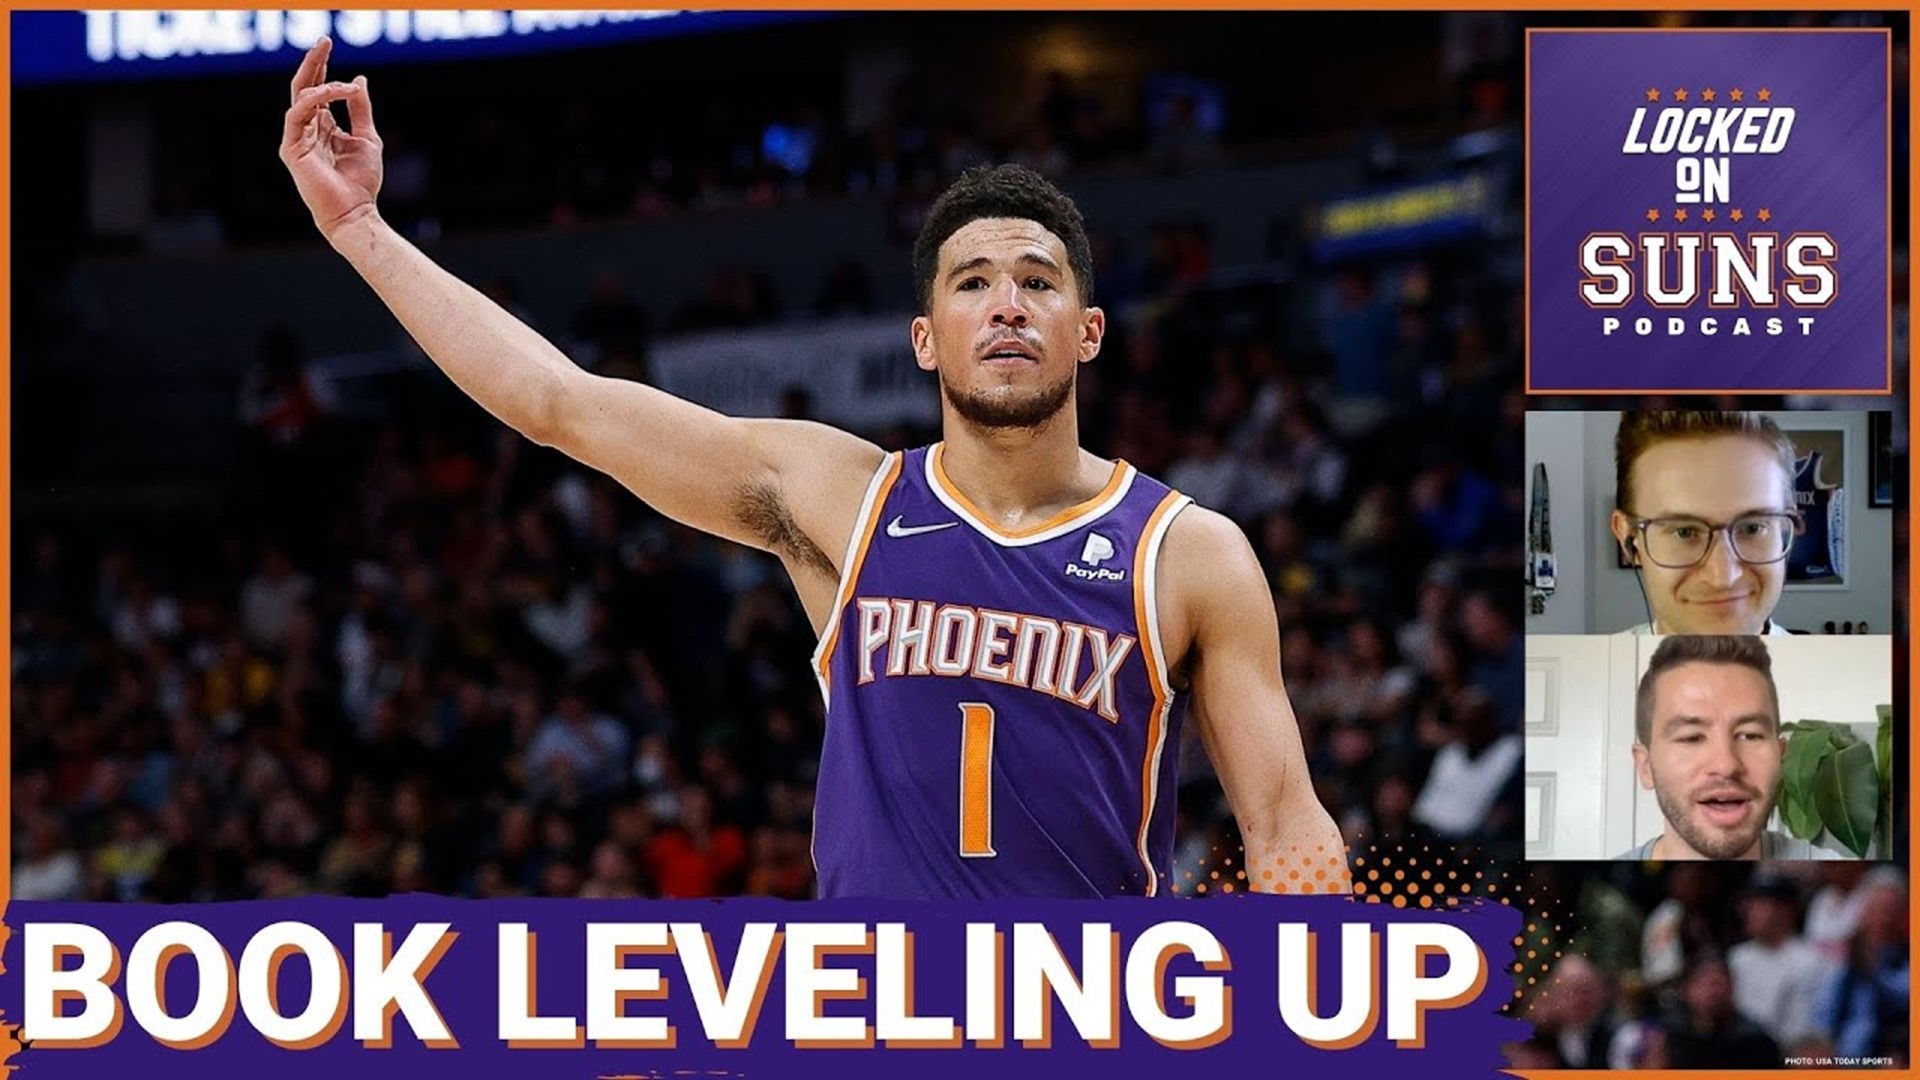 Who might want to buy the Phoenix Suns? - CBS News